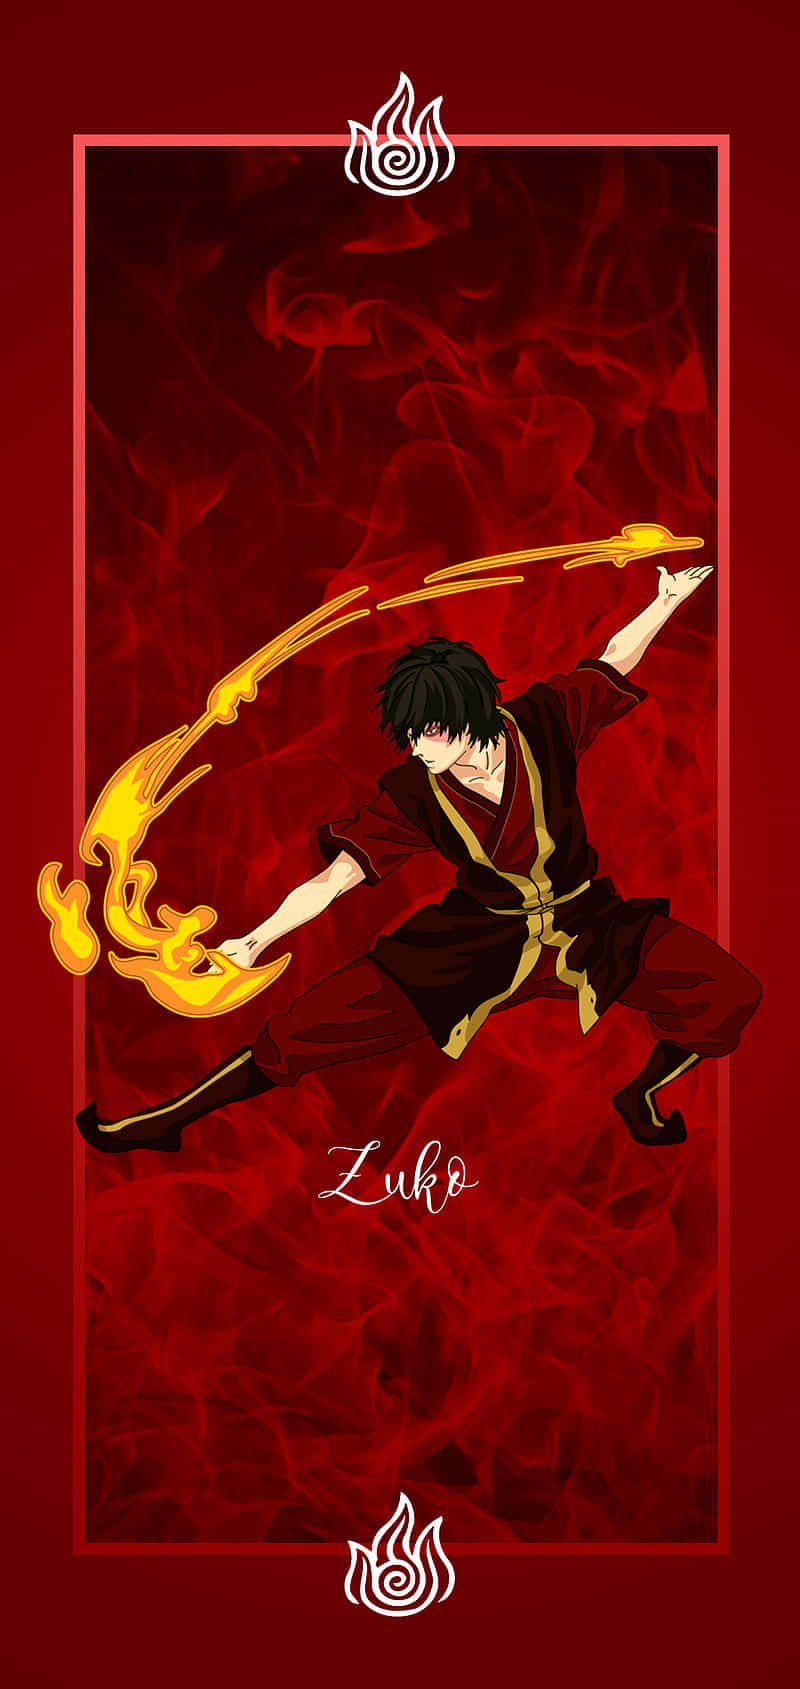 Zuko is a character from the popular Nickelodeon show Avatar: The Last Airbender